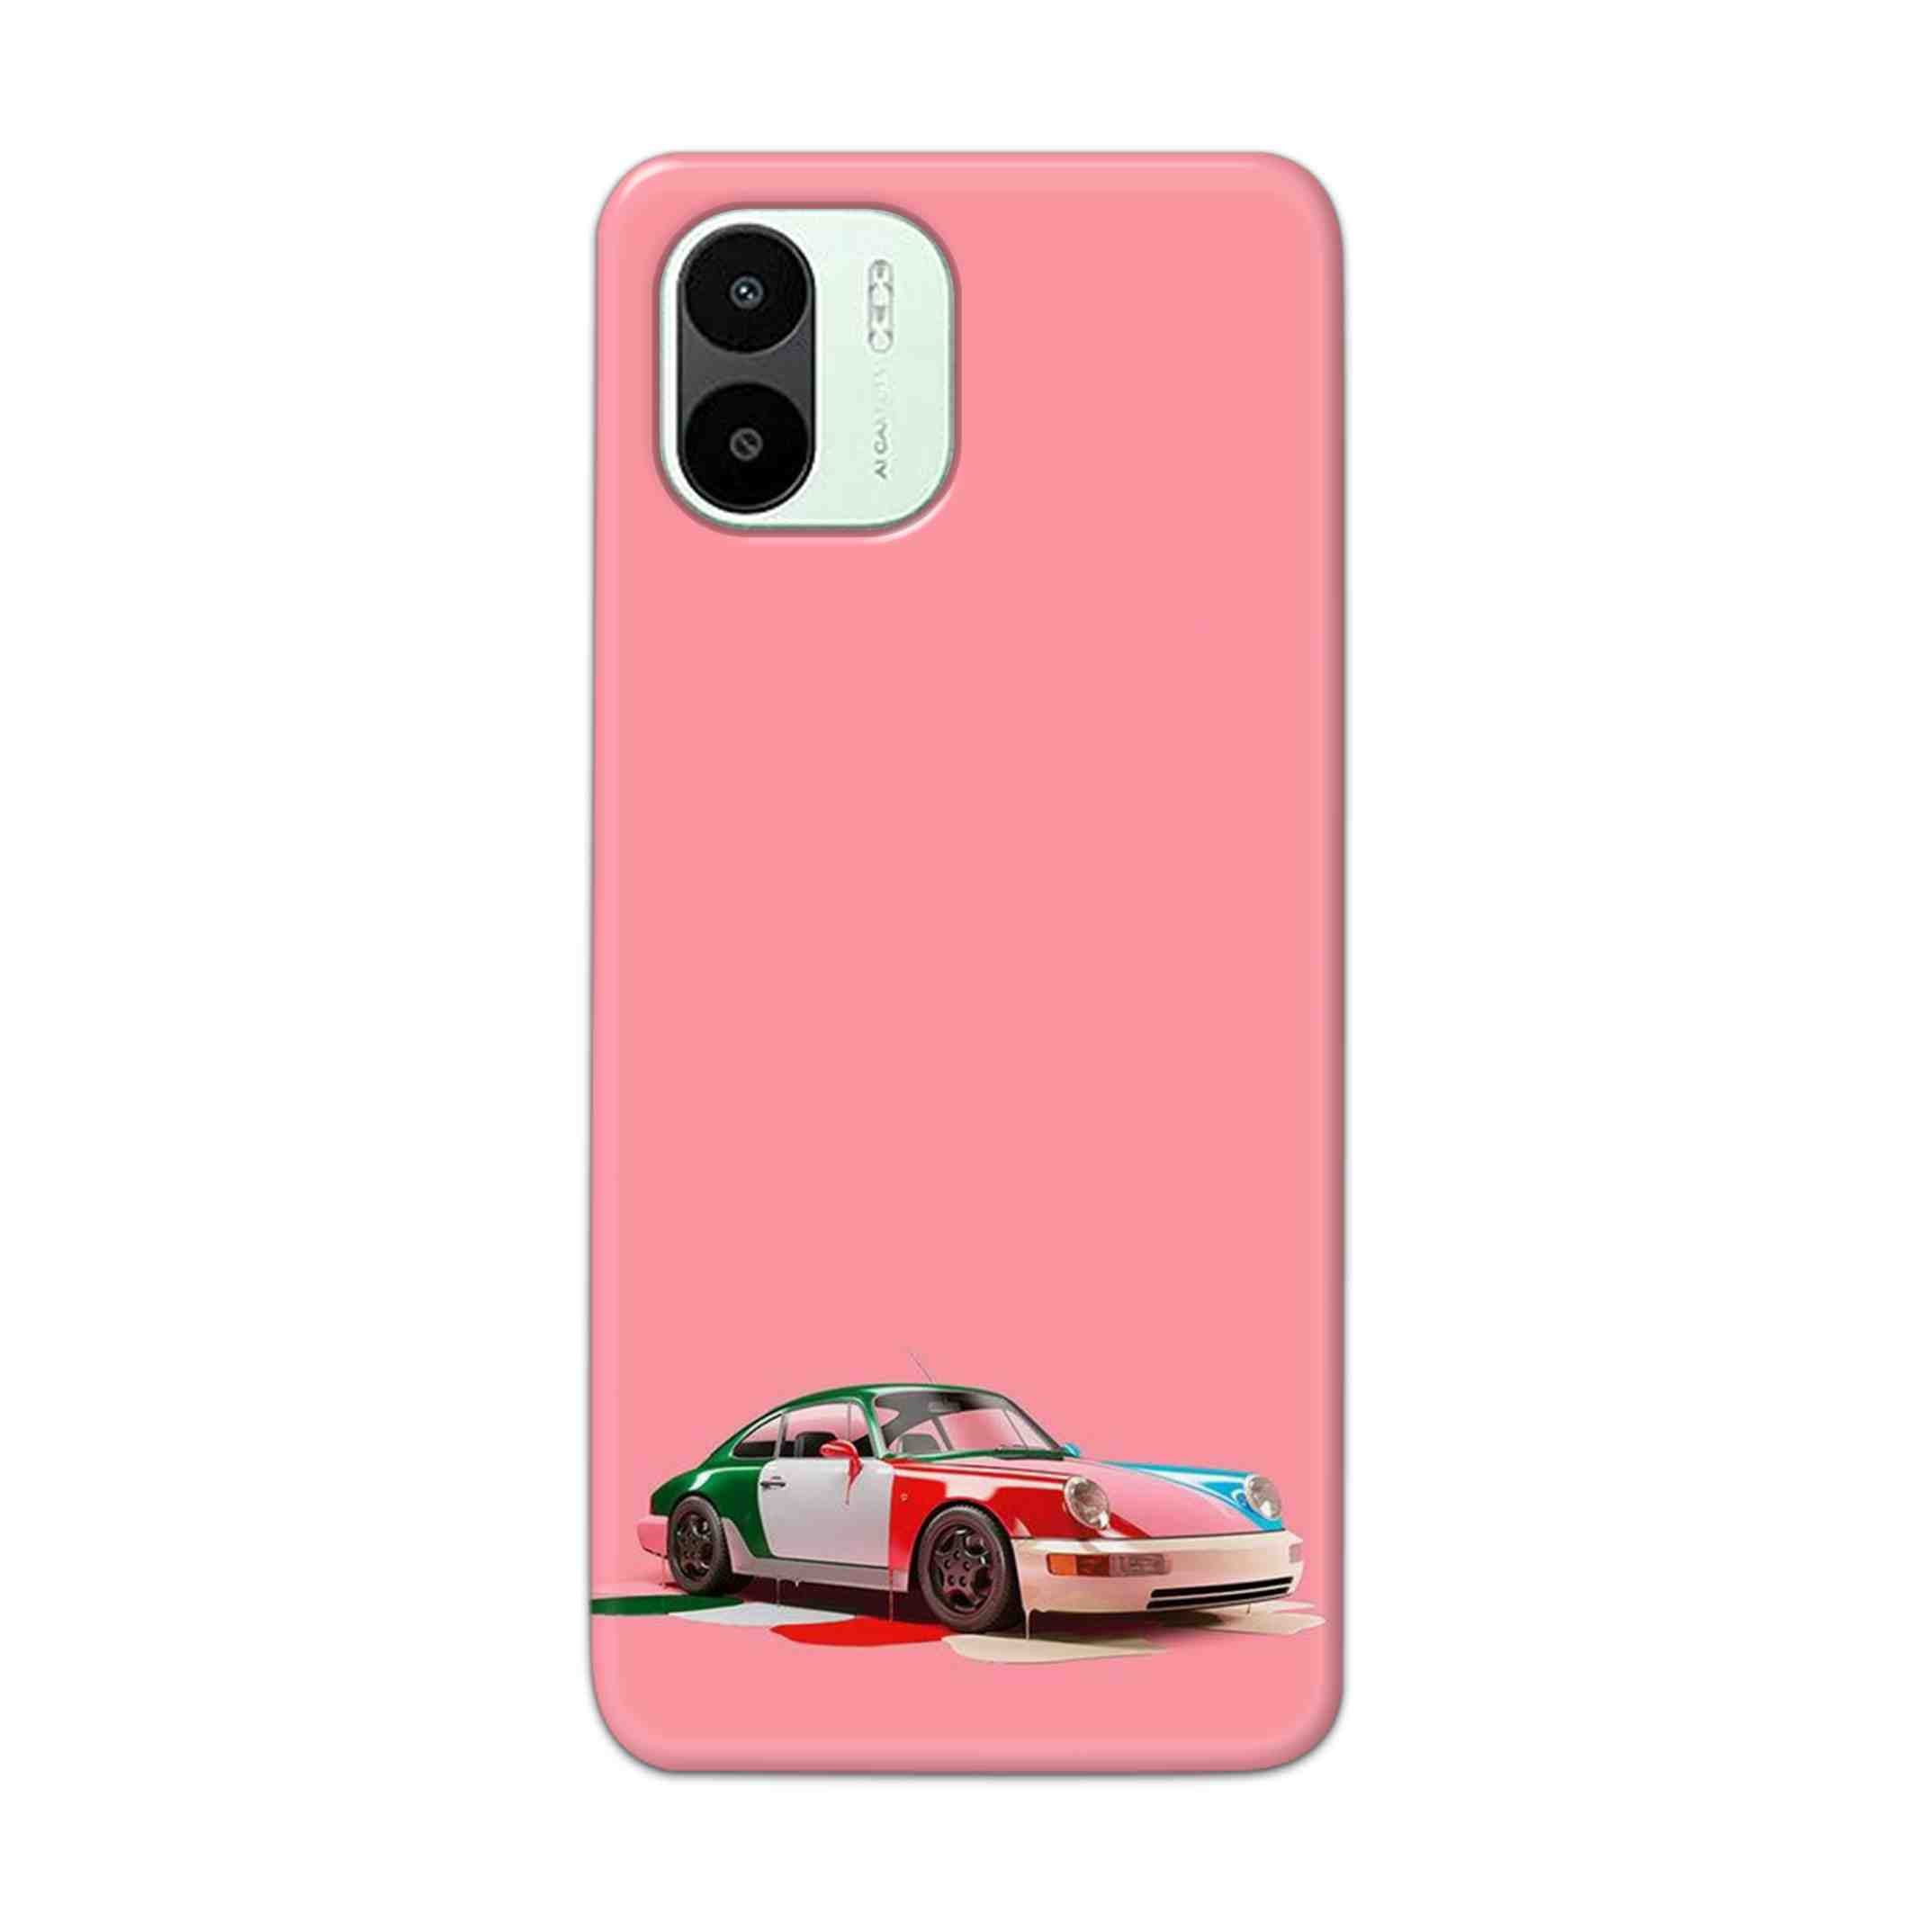 Buy Pink Porche Hard Back Mobile Phone Case Cover For Xiaomi Redmi A1 5G Online